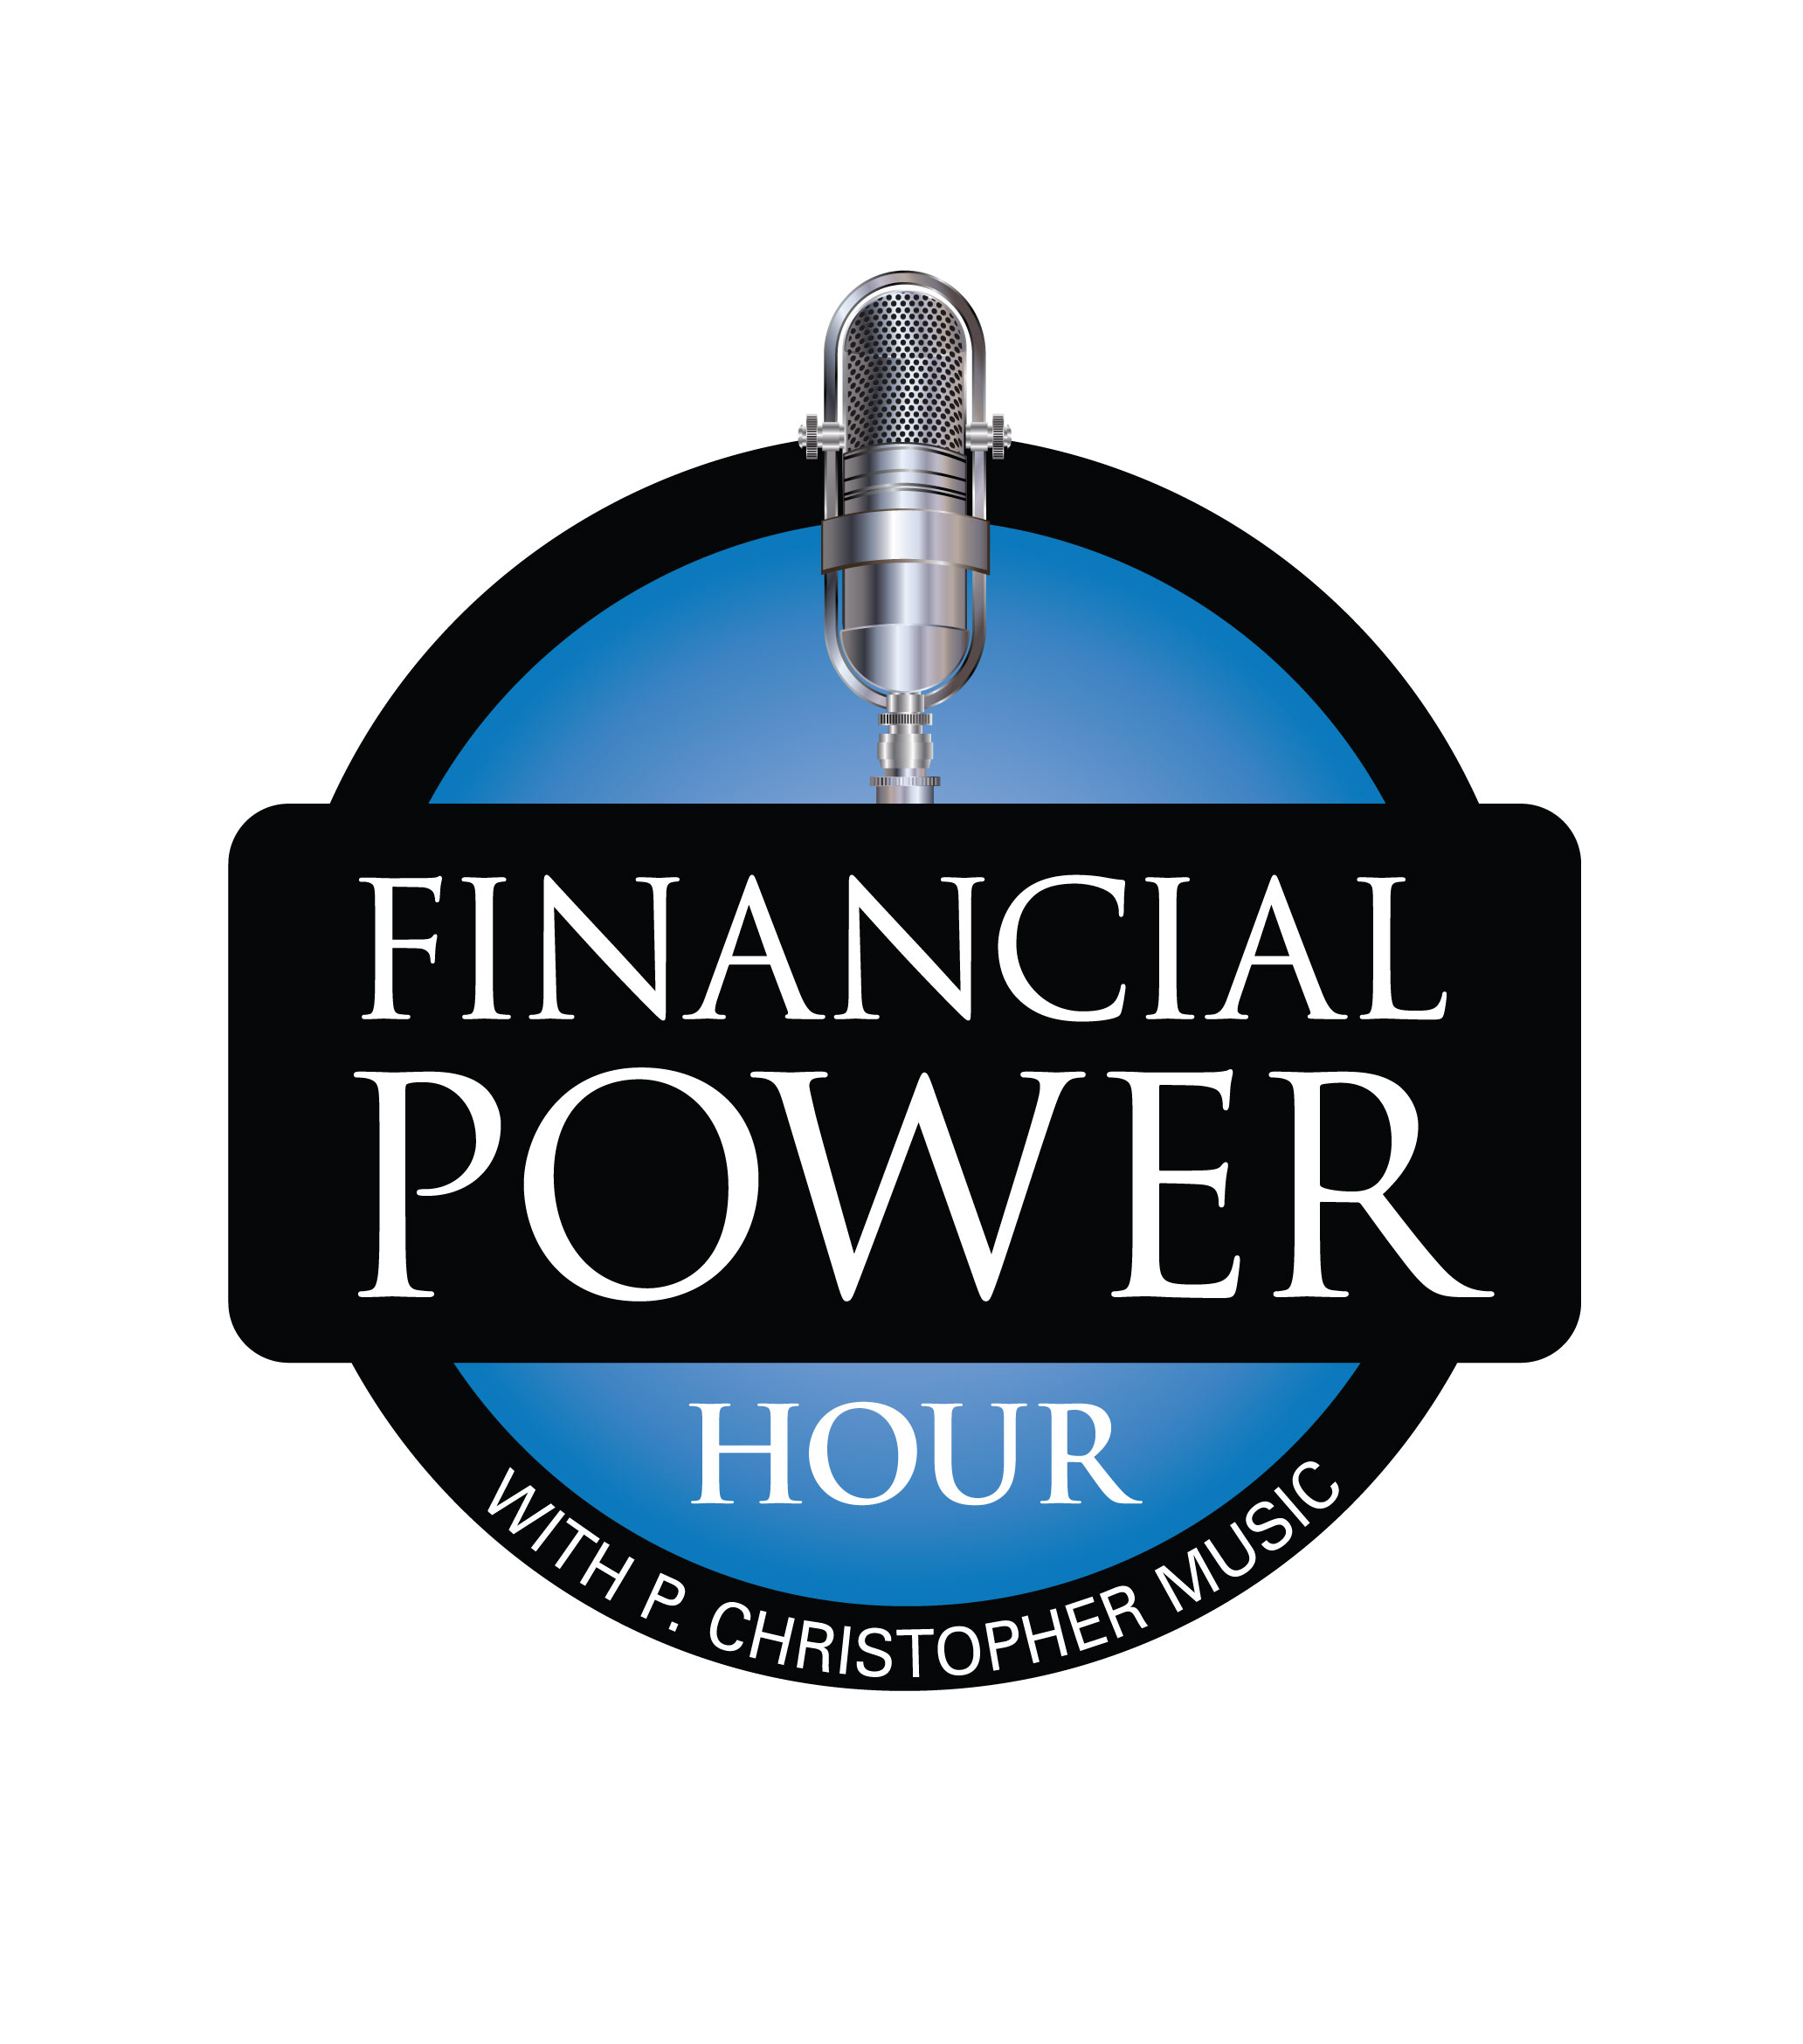 Financial Power Hour host Christopher Music - How to get focused and stop procrastinating to achieve BIG with inspirational guest Croix Sather